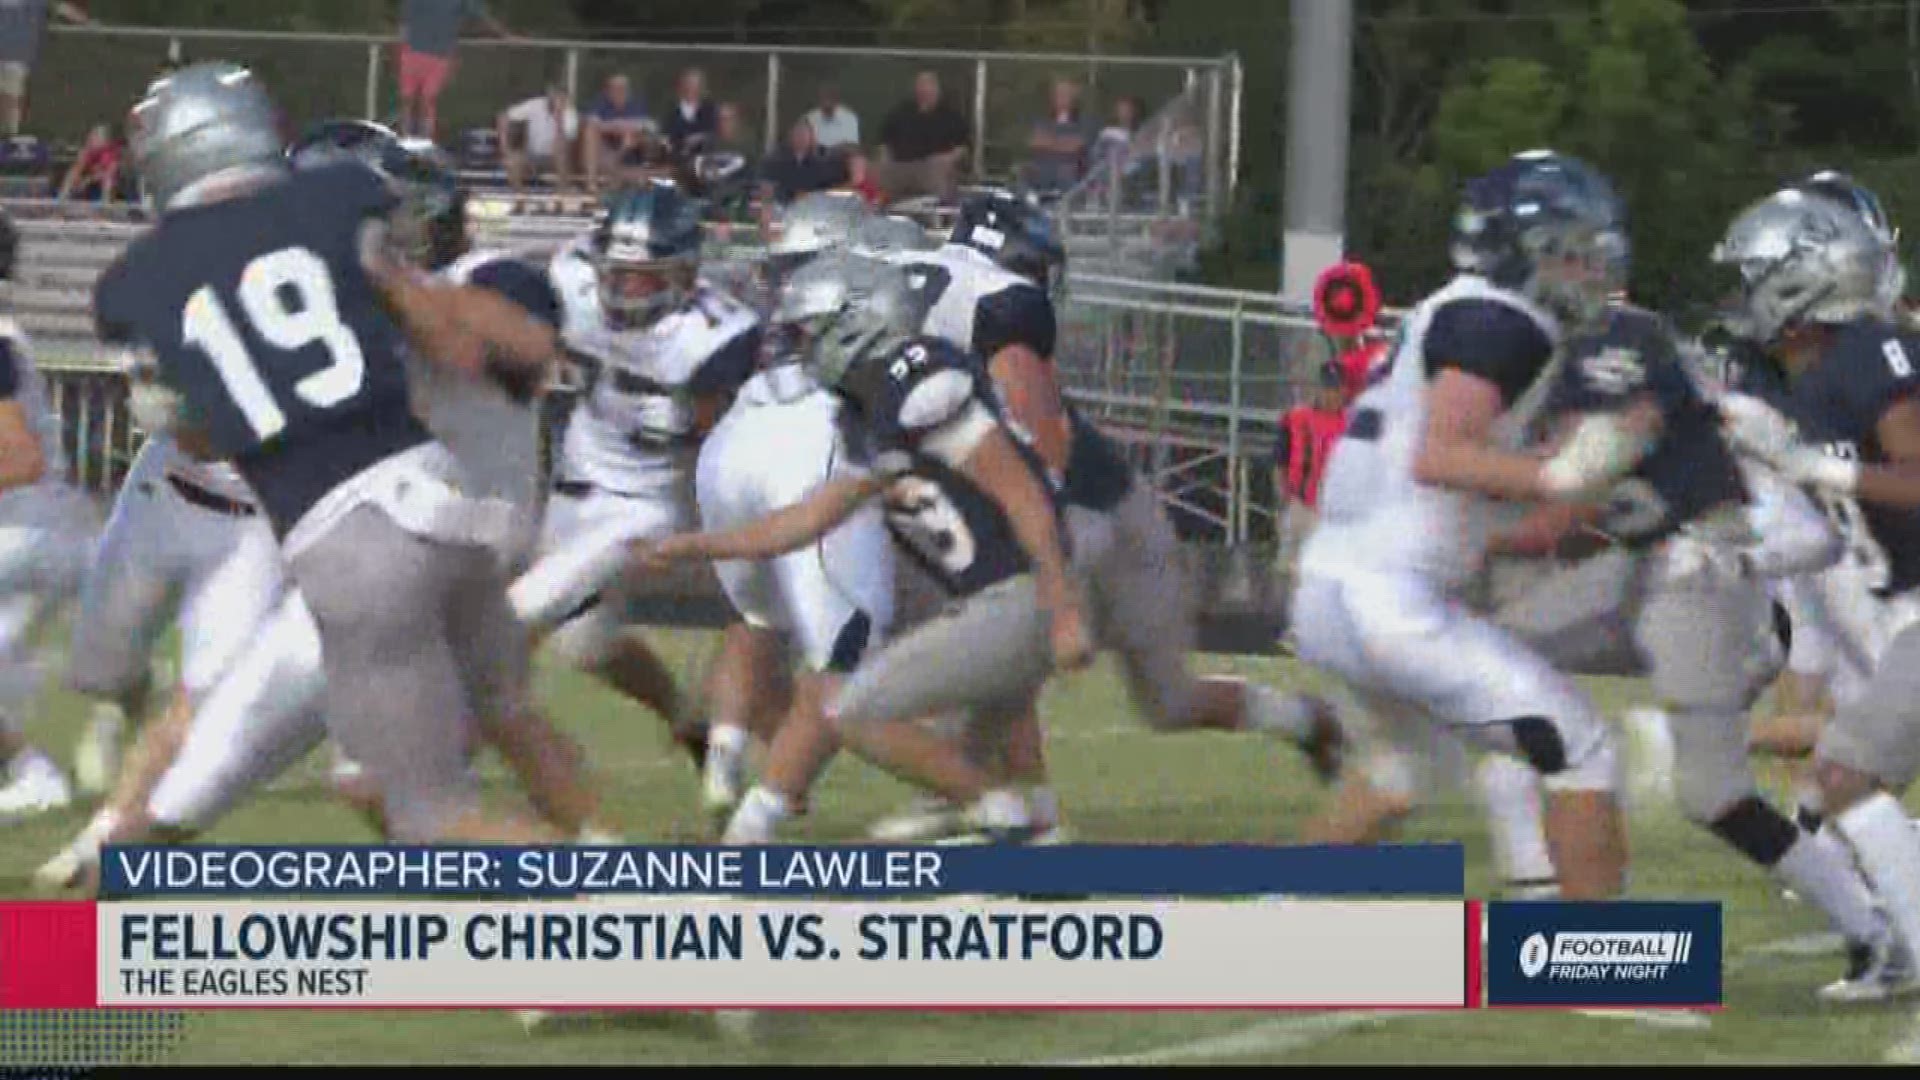 Here are your Football Friday Night highlights from September 20.